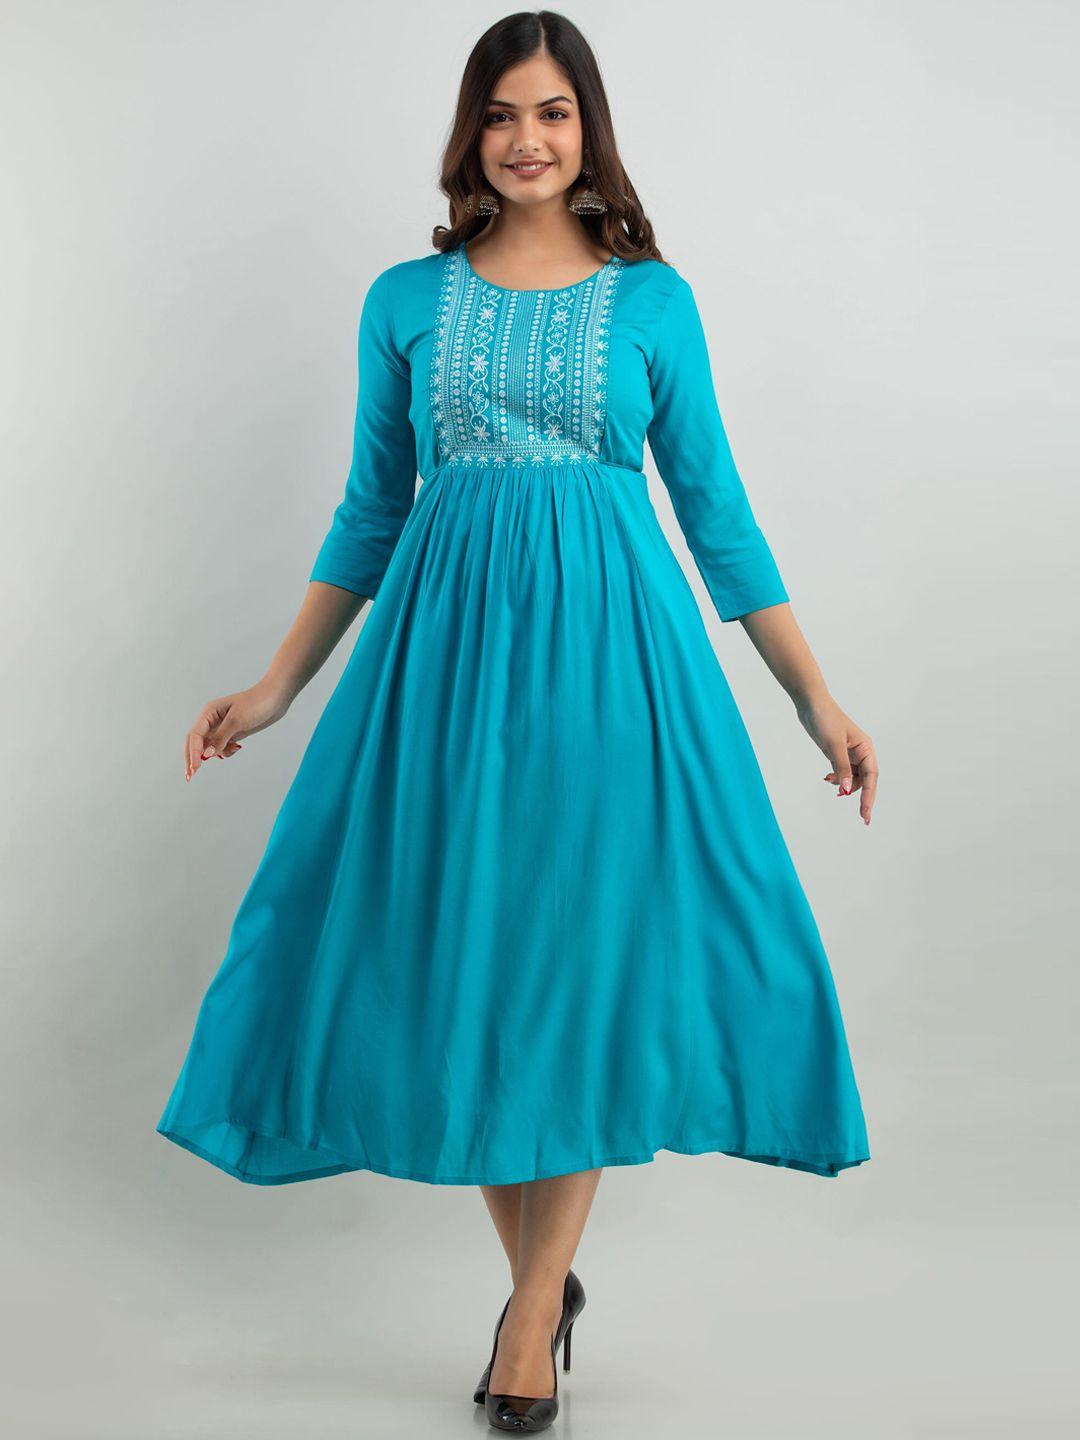 women touch turquoise blue ethnic motifs embroidered ethnic midi dress